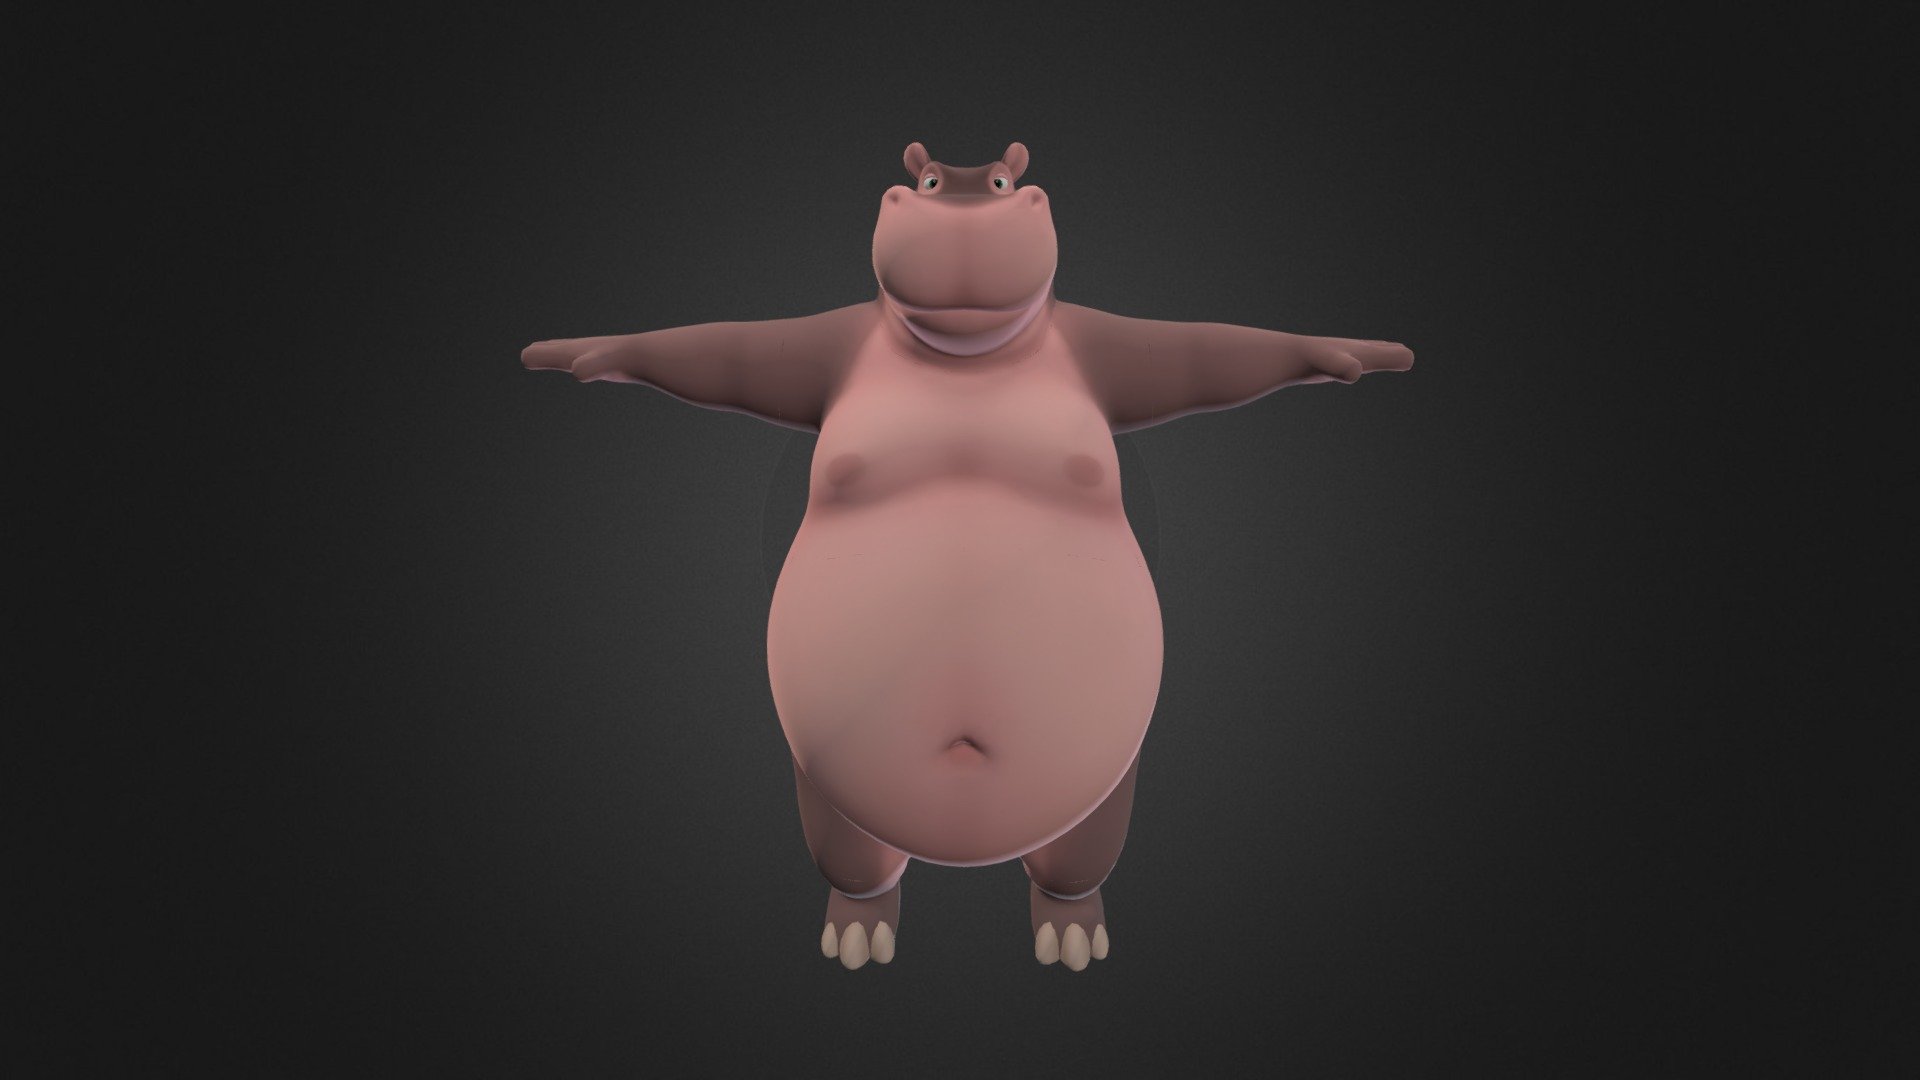 A hippo avatar by Eligecos! - MaiTai the Hippo (by Eligecos) - 3D model by HyruleFan 3d model